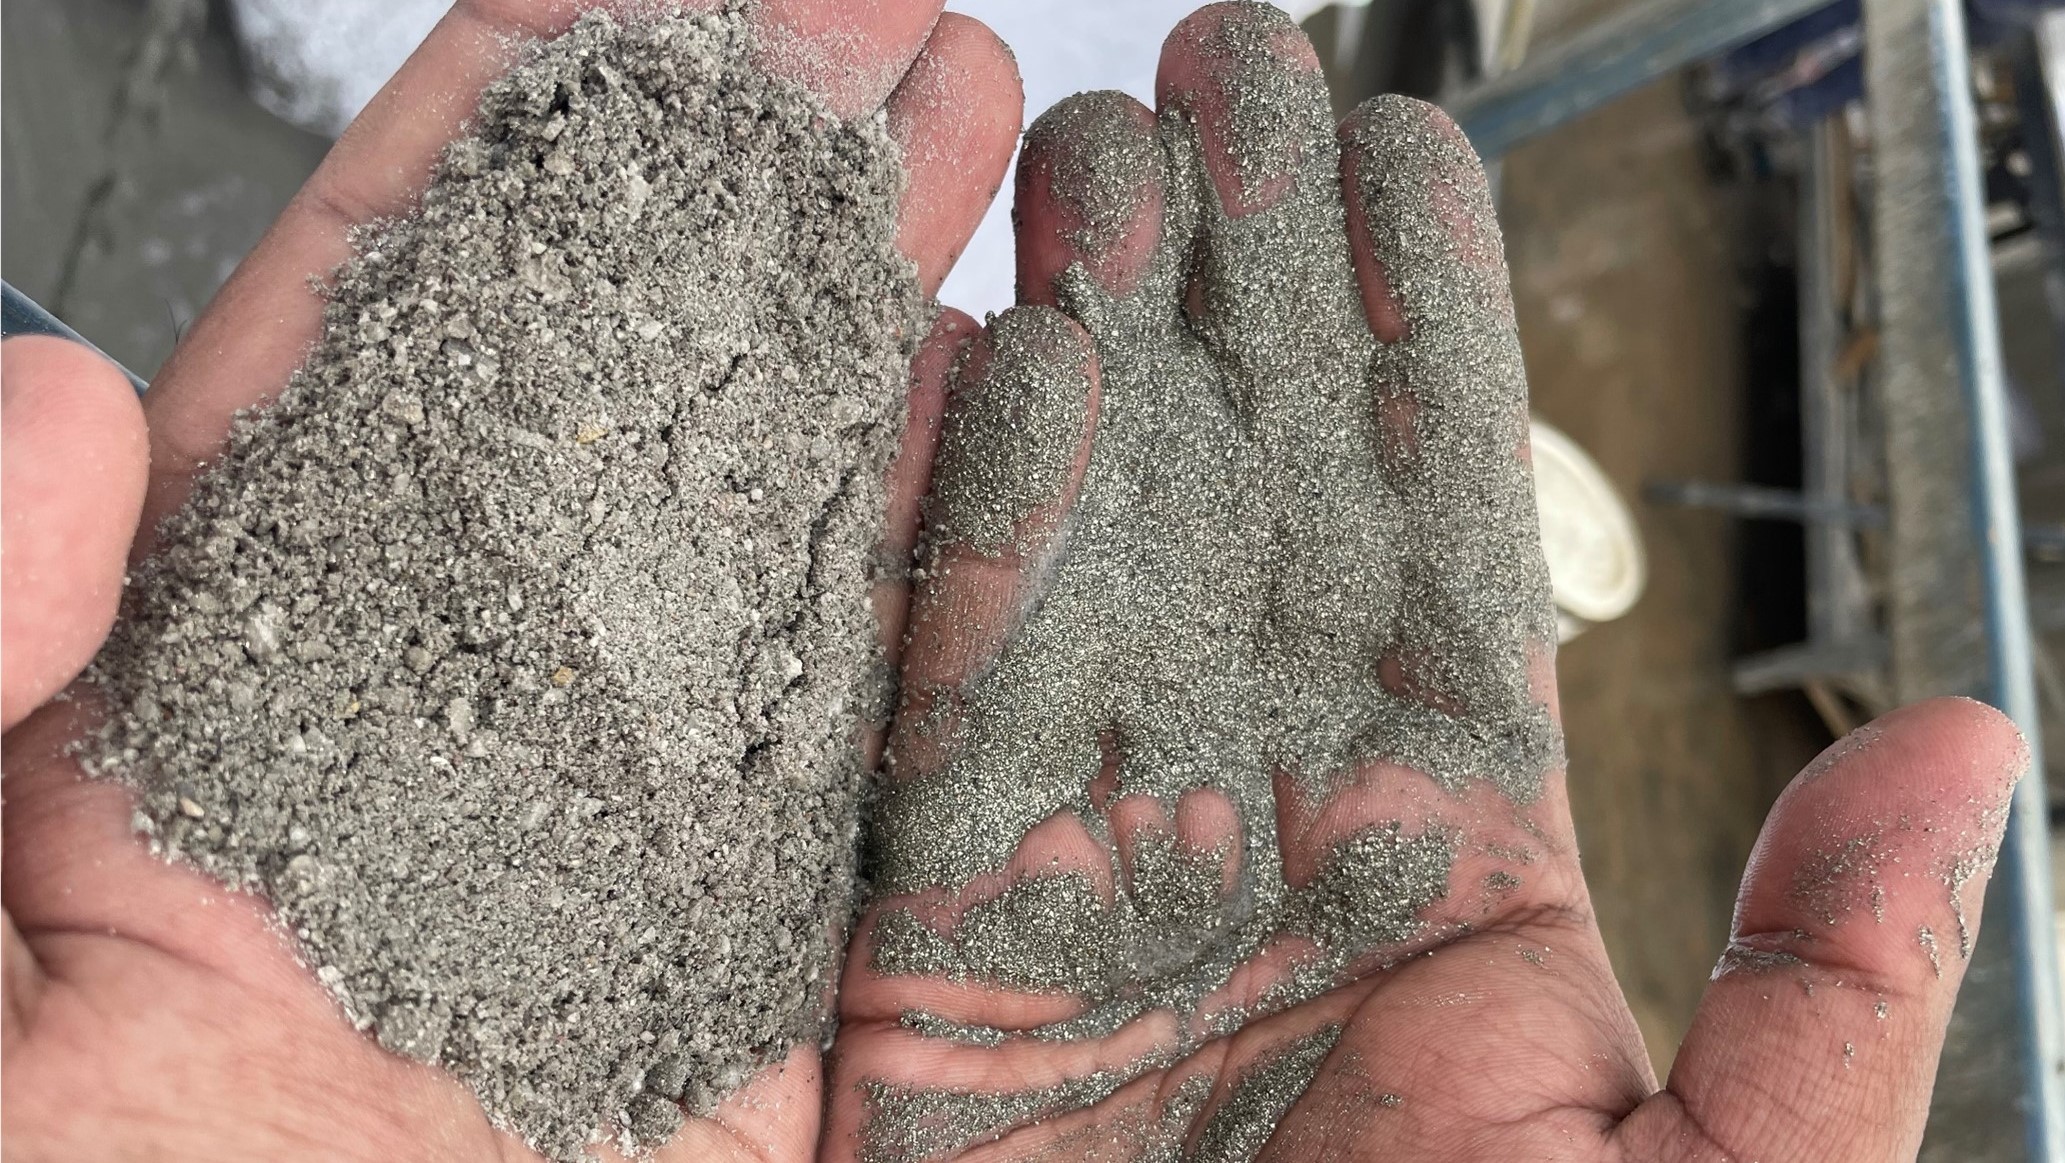 Figure 2 - Feed ore milled to <4 mm on left hand, and gravity concentrate on right hand